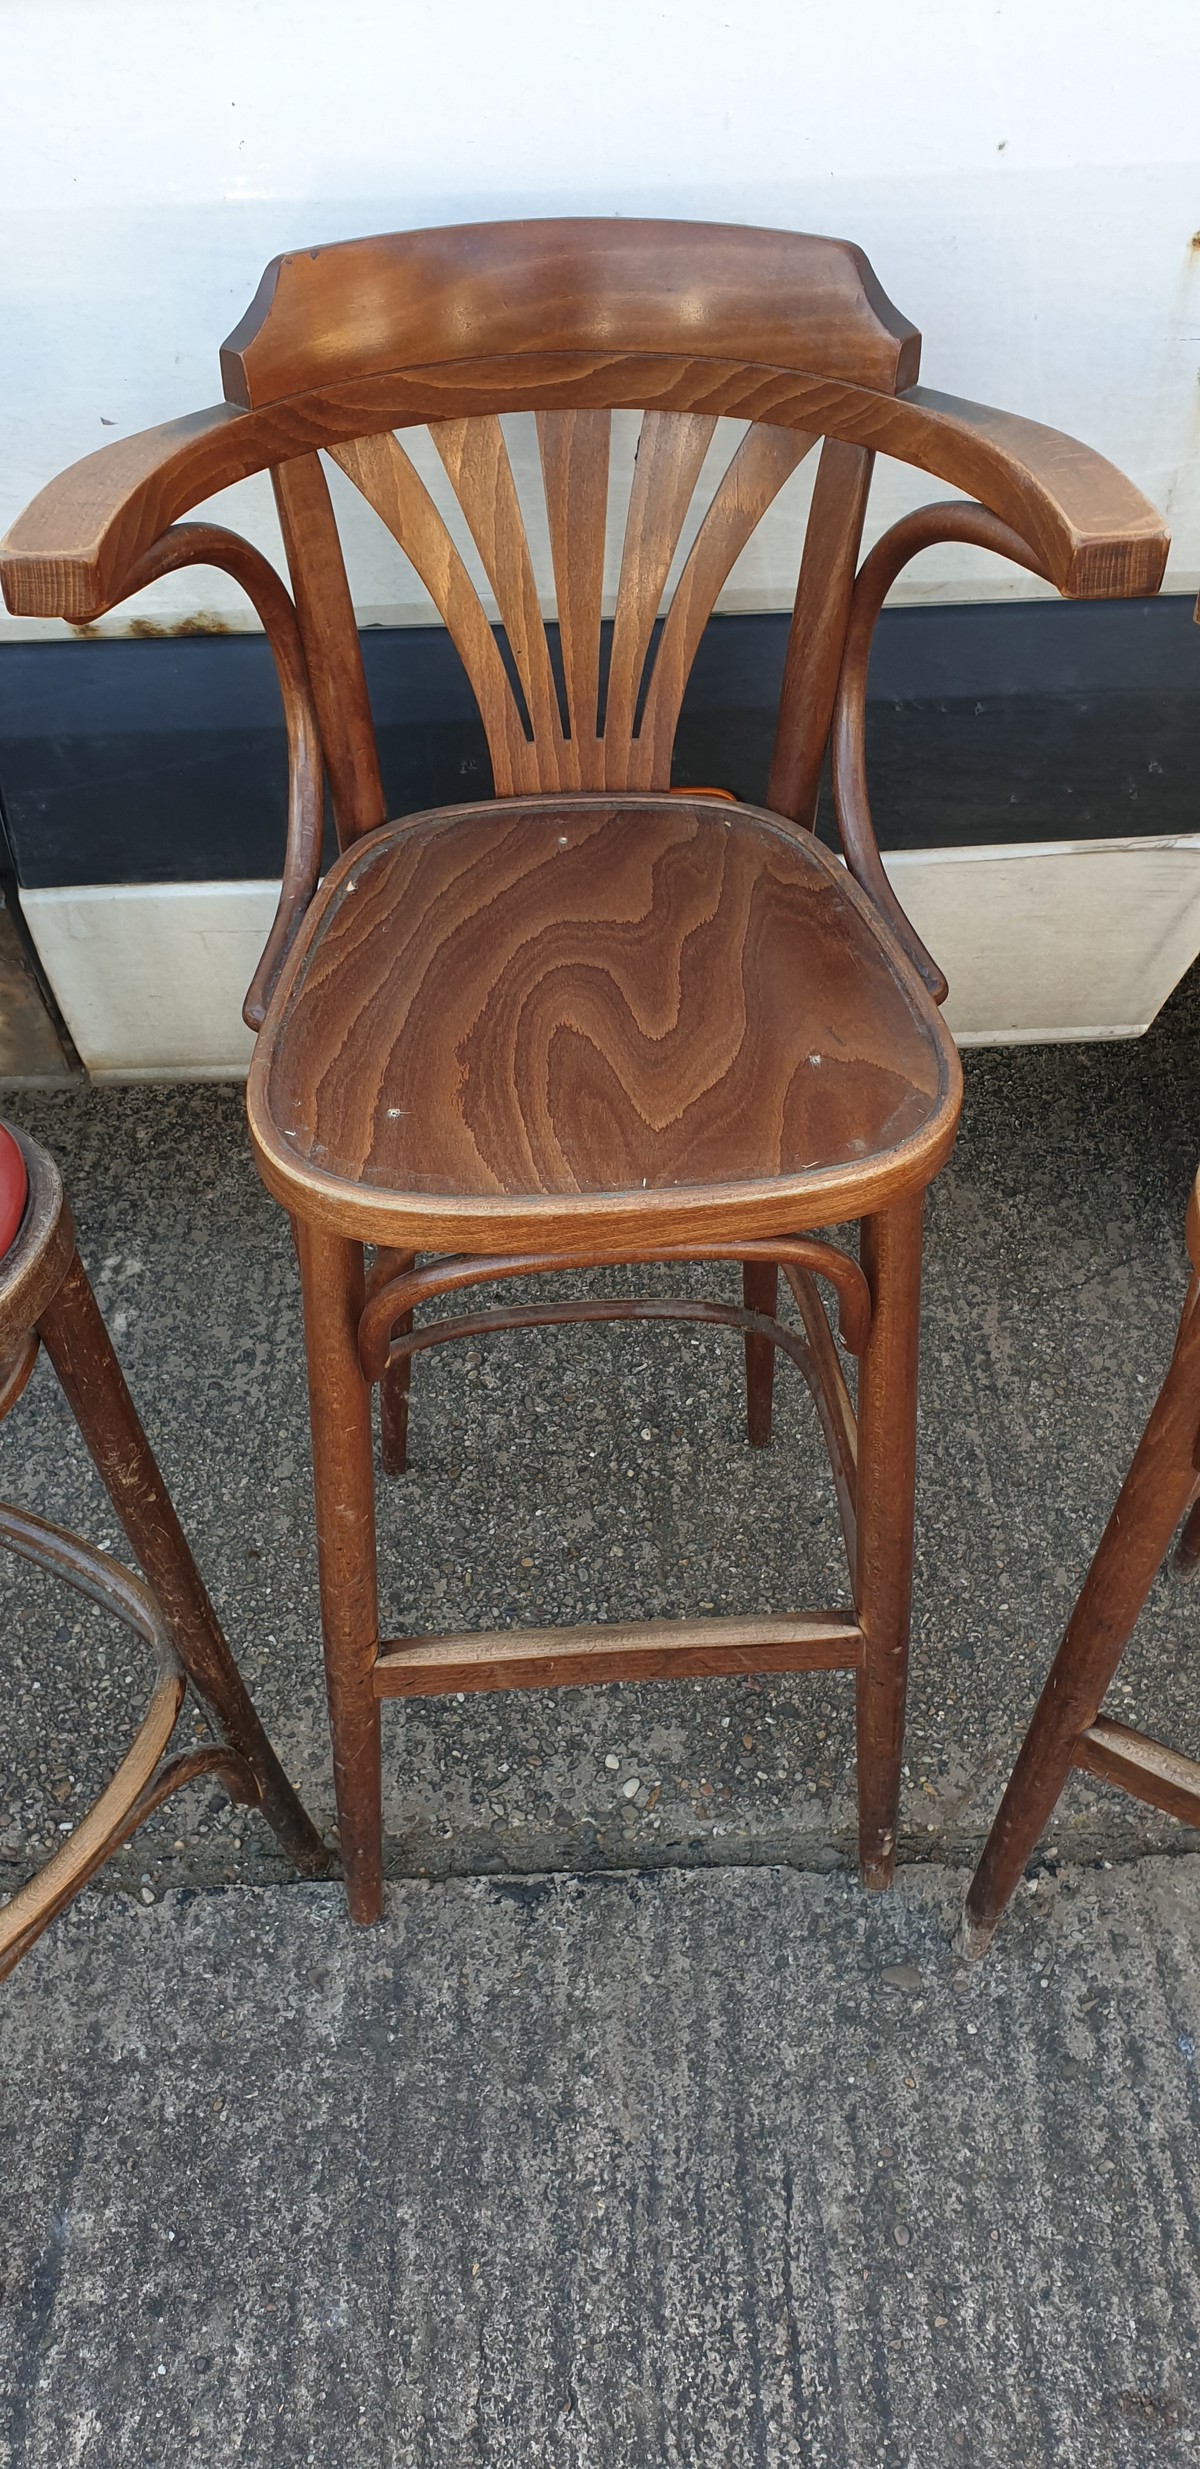 Secondhand Chairs and Tables | Cafe or Bistro Chairs | 16x ...